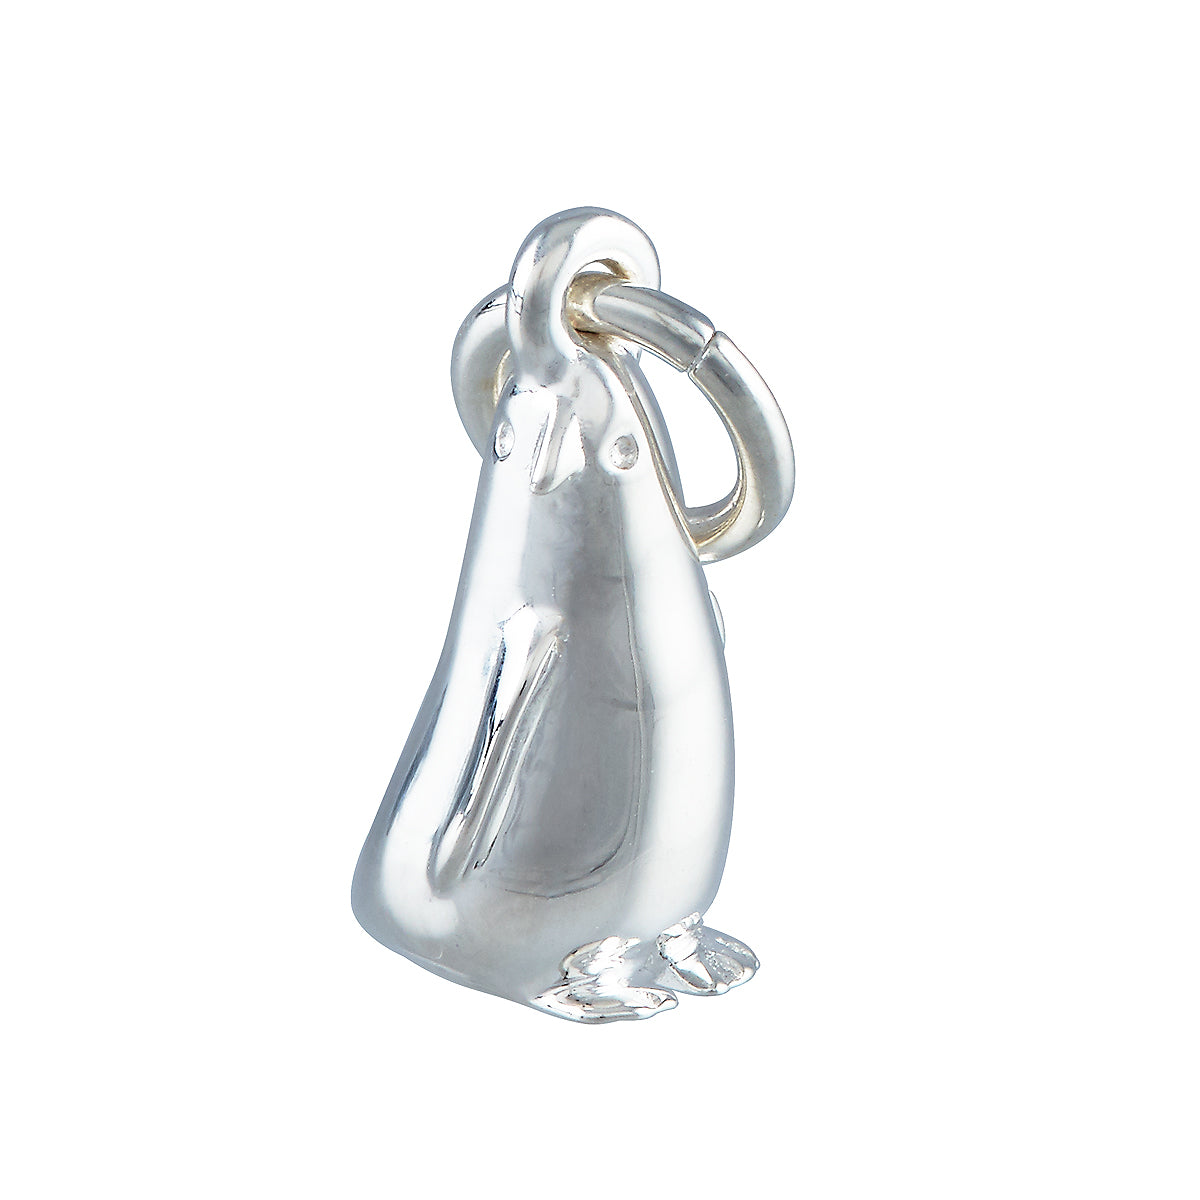 Silver Penguin Bracelet Charm with perfect detail free UK delivery